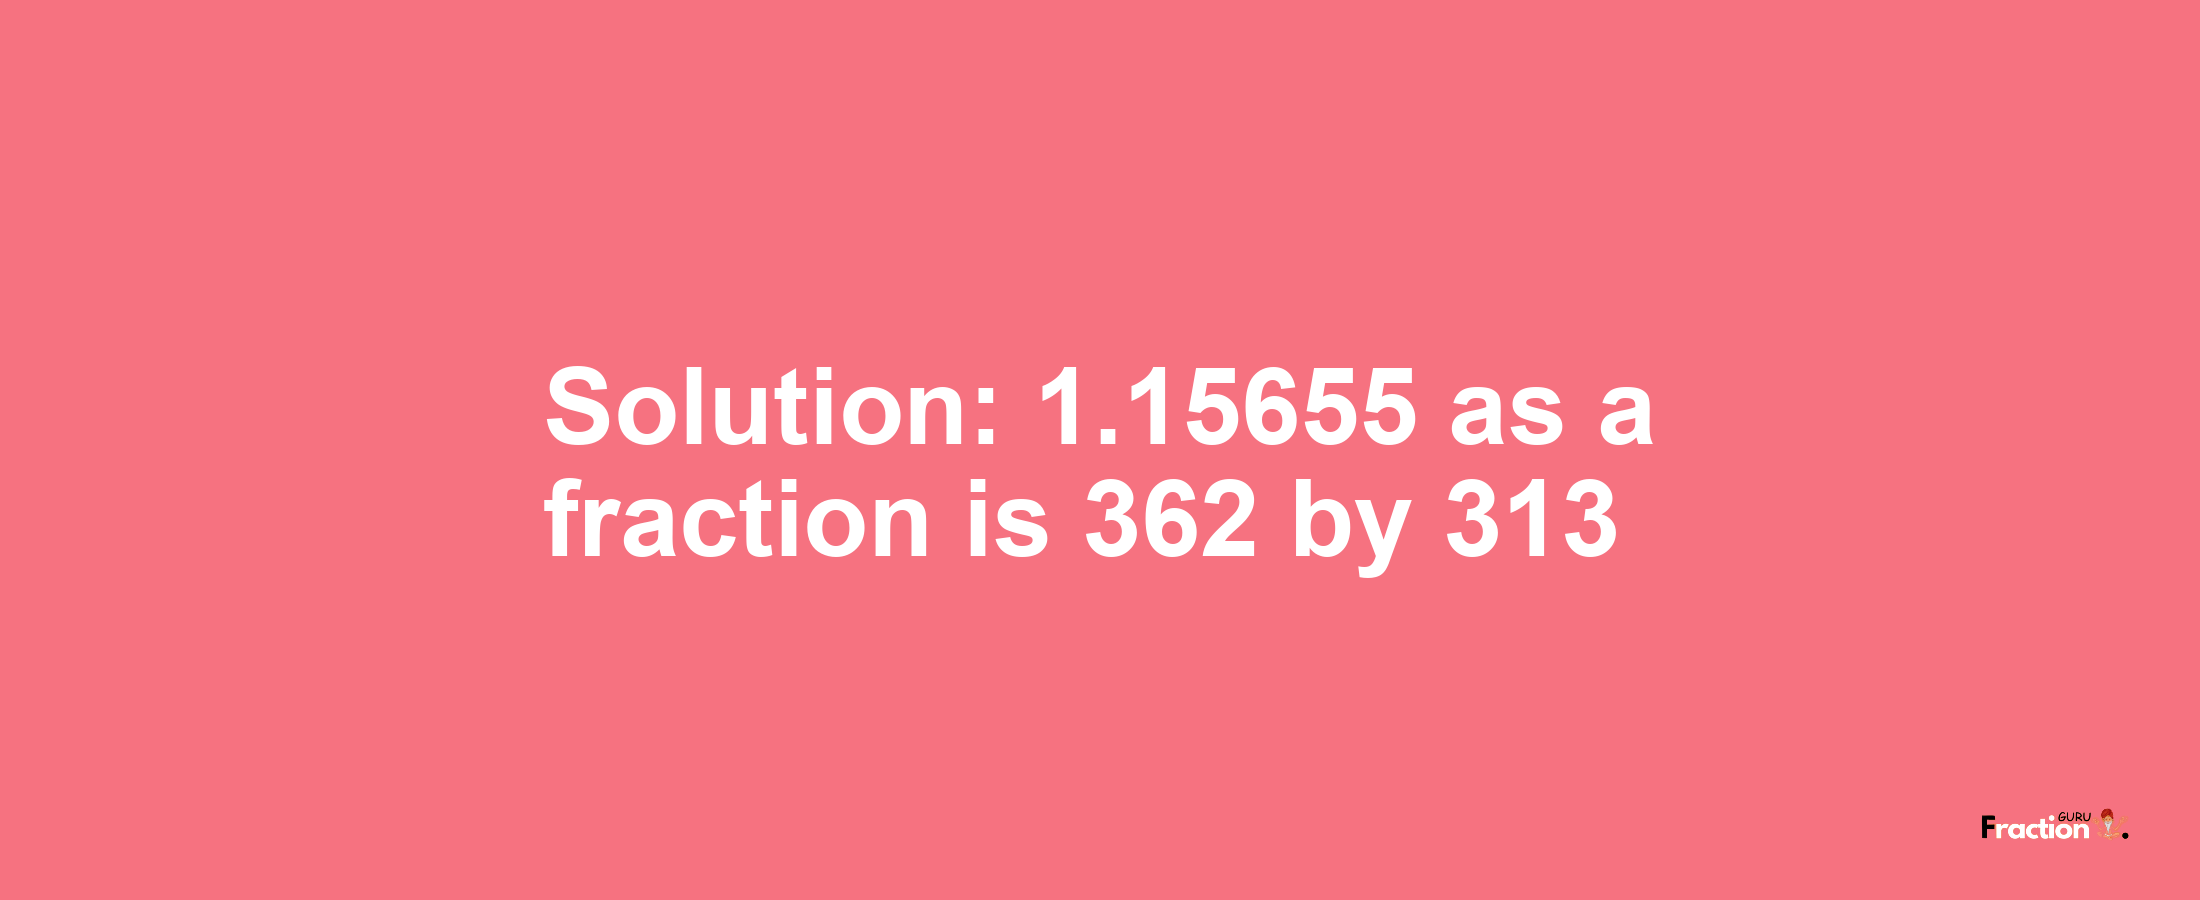 Solution:1.15655 as a fraction is 362/313